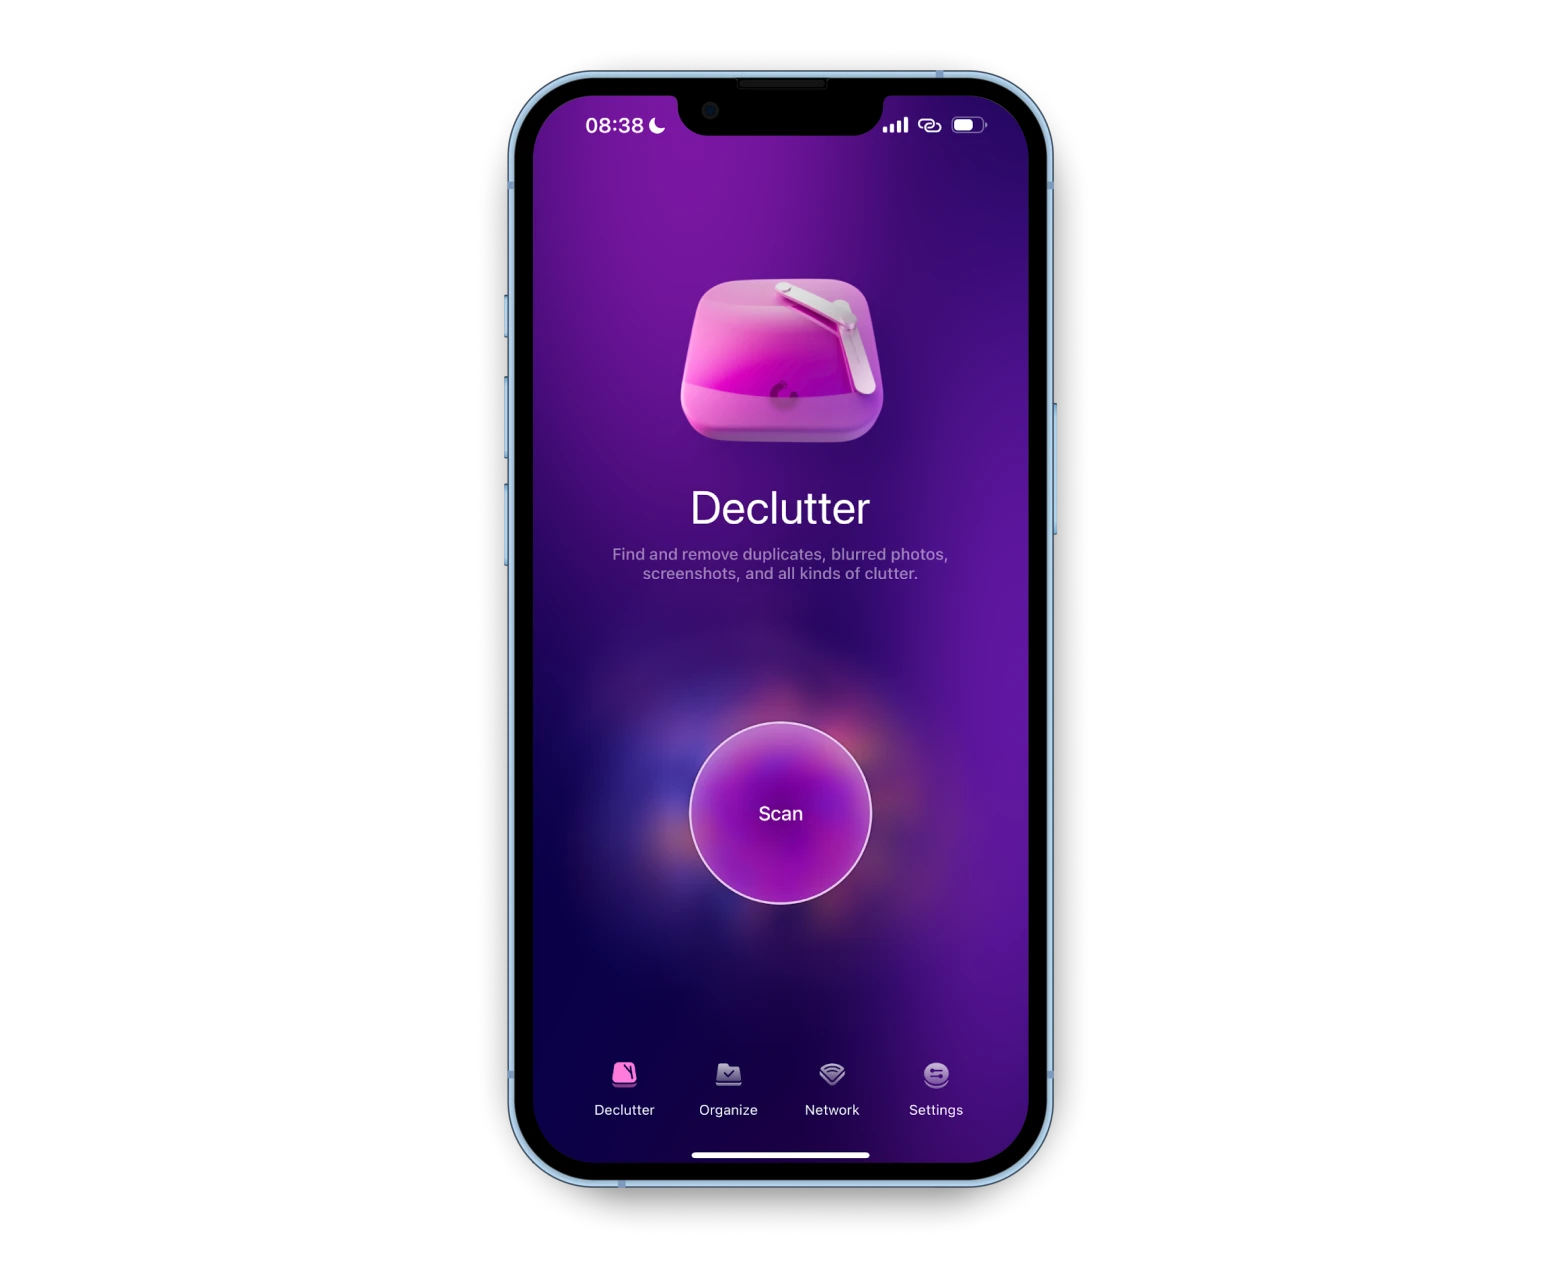 Declutter scan: Find and remove duplicates, blurred photos, screenshots, and all kinds of clutter.